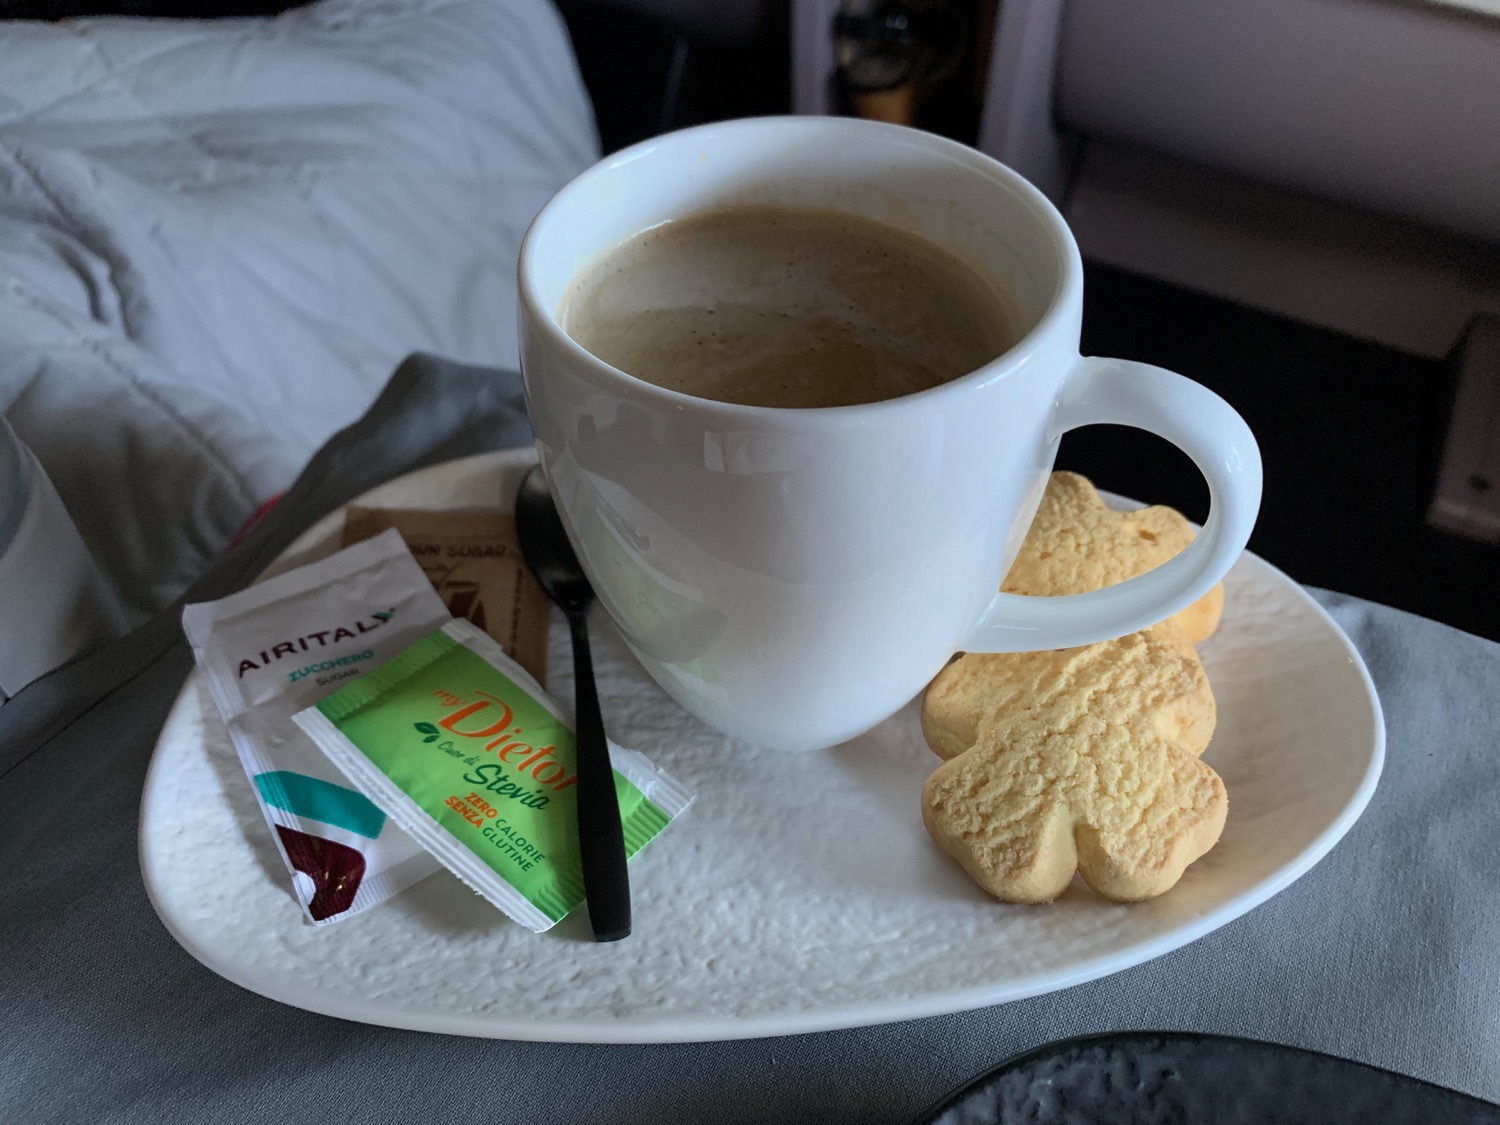 a cup of coffee and cookies on a plate